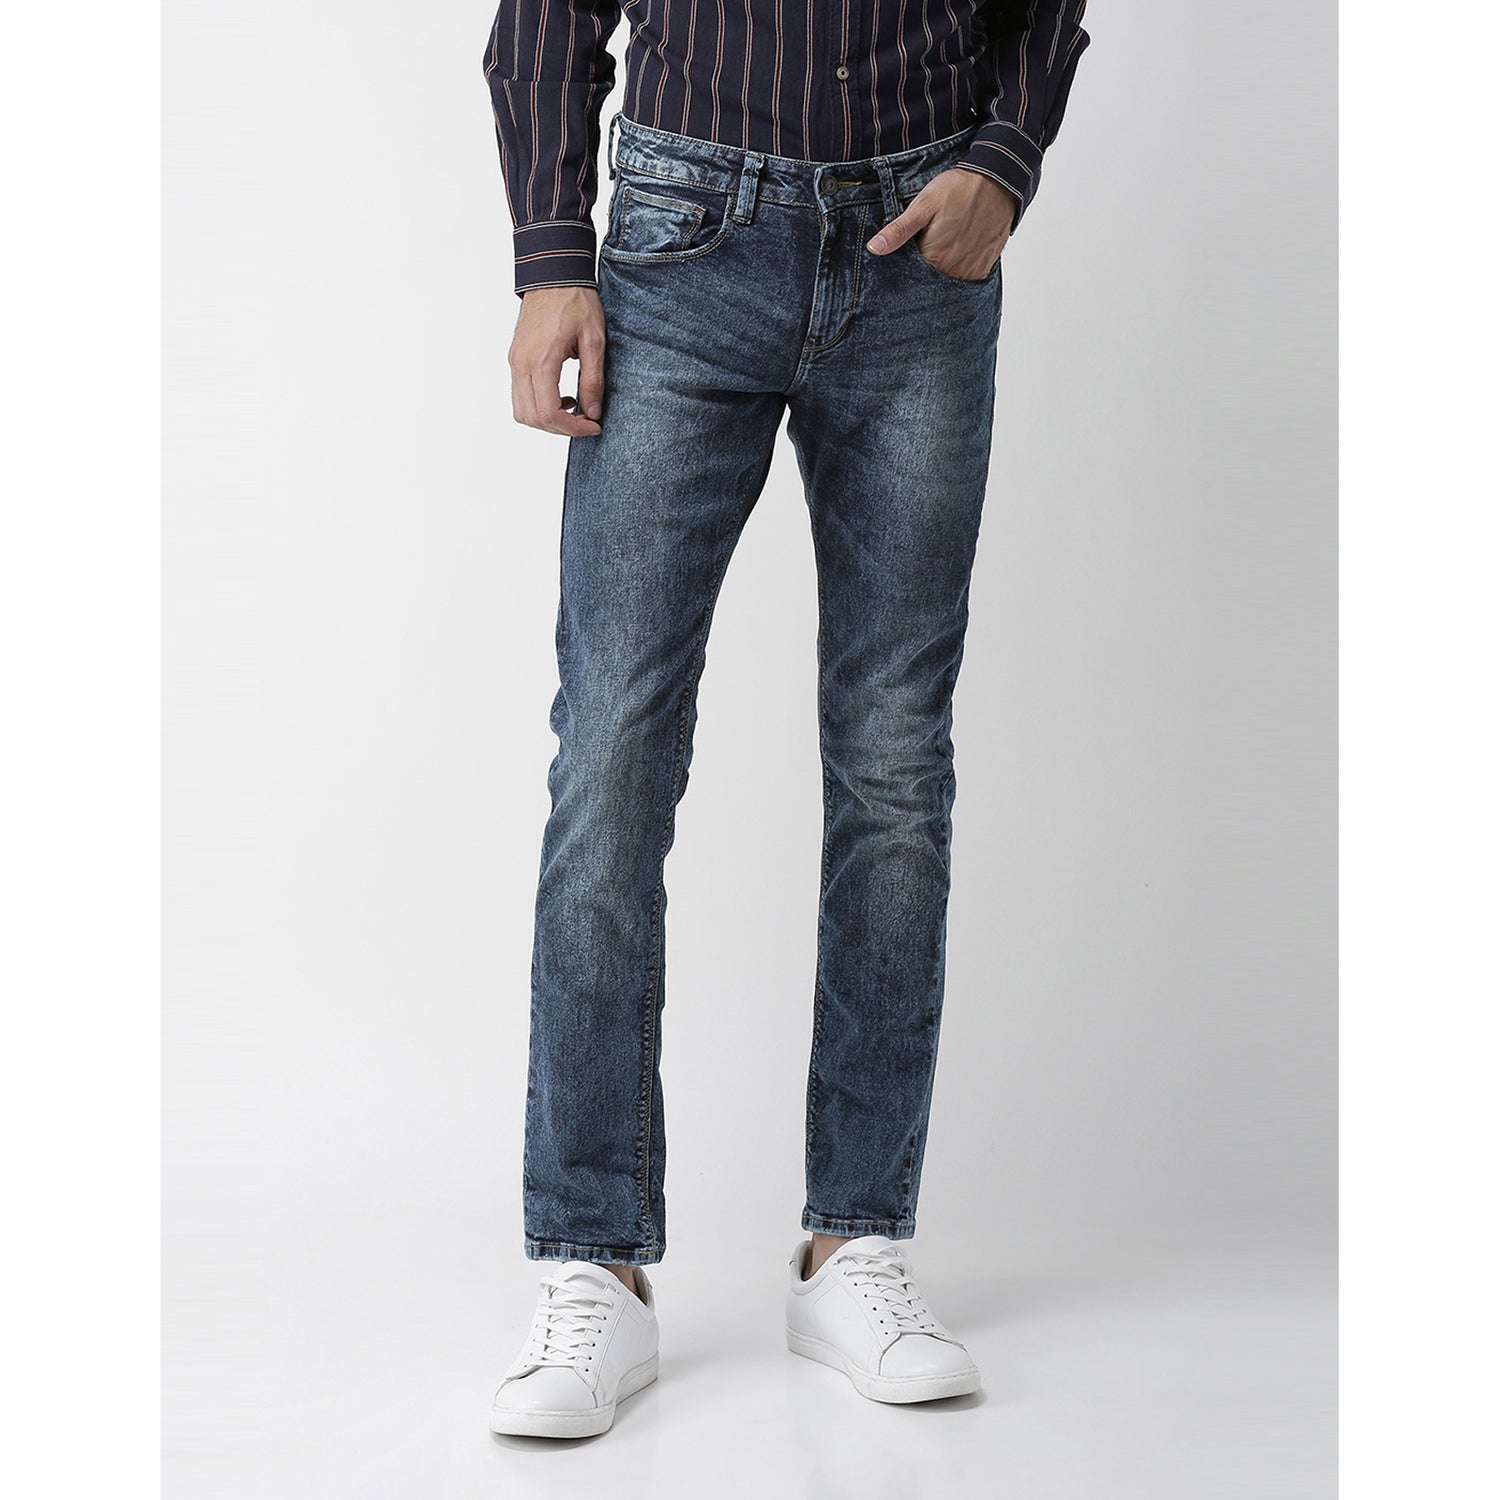 Blue and Navy Blue Slim Fit Mid-Rise Clean Look Jeans (MOBASICSL)